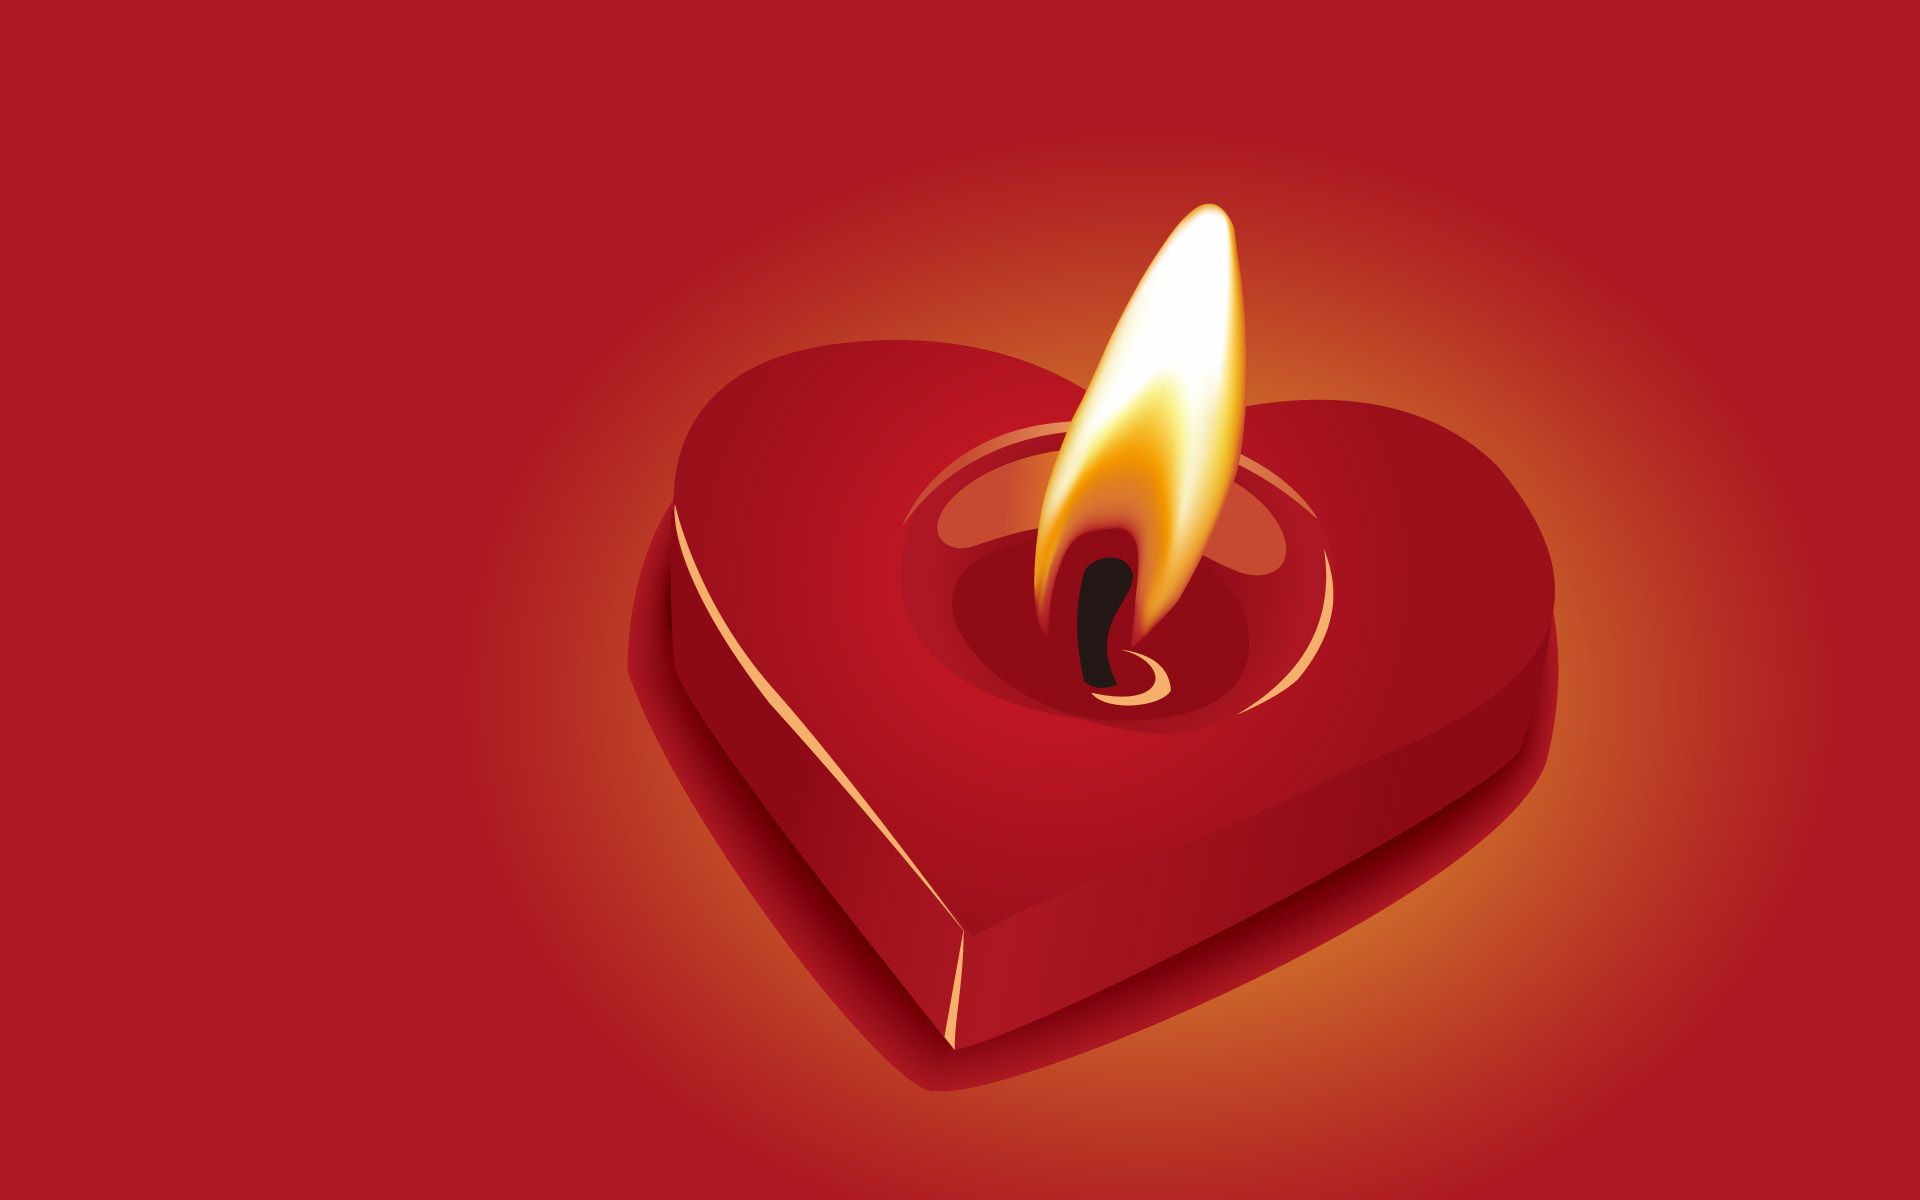 Love Candle Hearts Background Wallpaper HD Widescreen